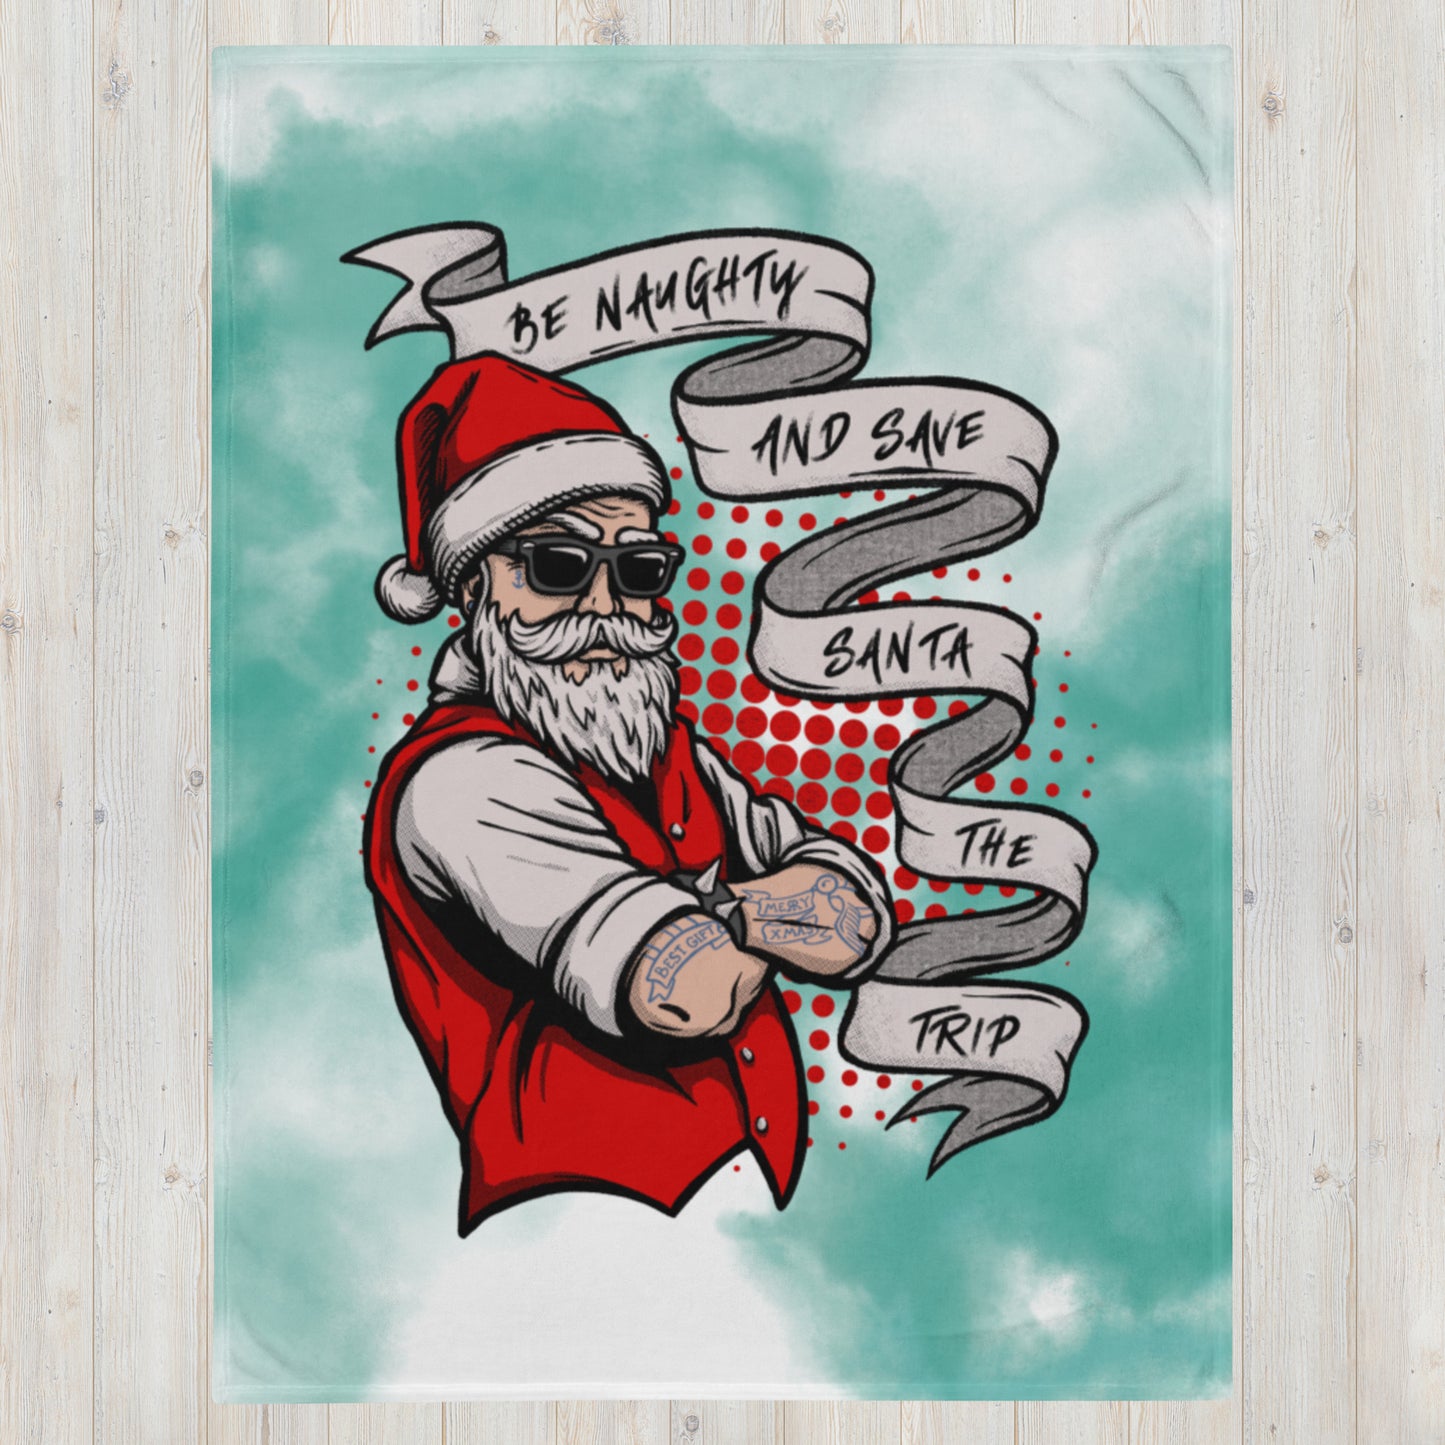 BE NAUGHTY AND SAVE SANTA THE TRIP- Throw Blanket